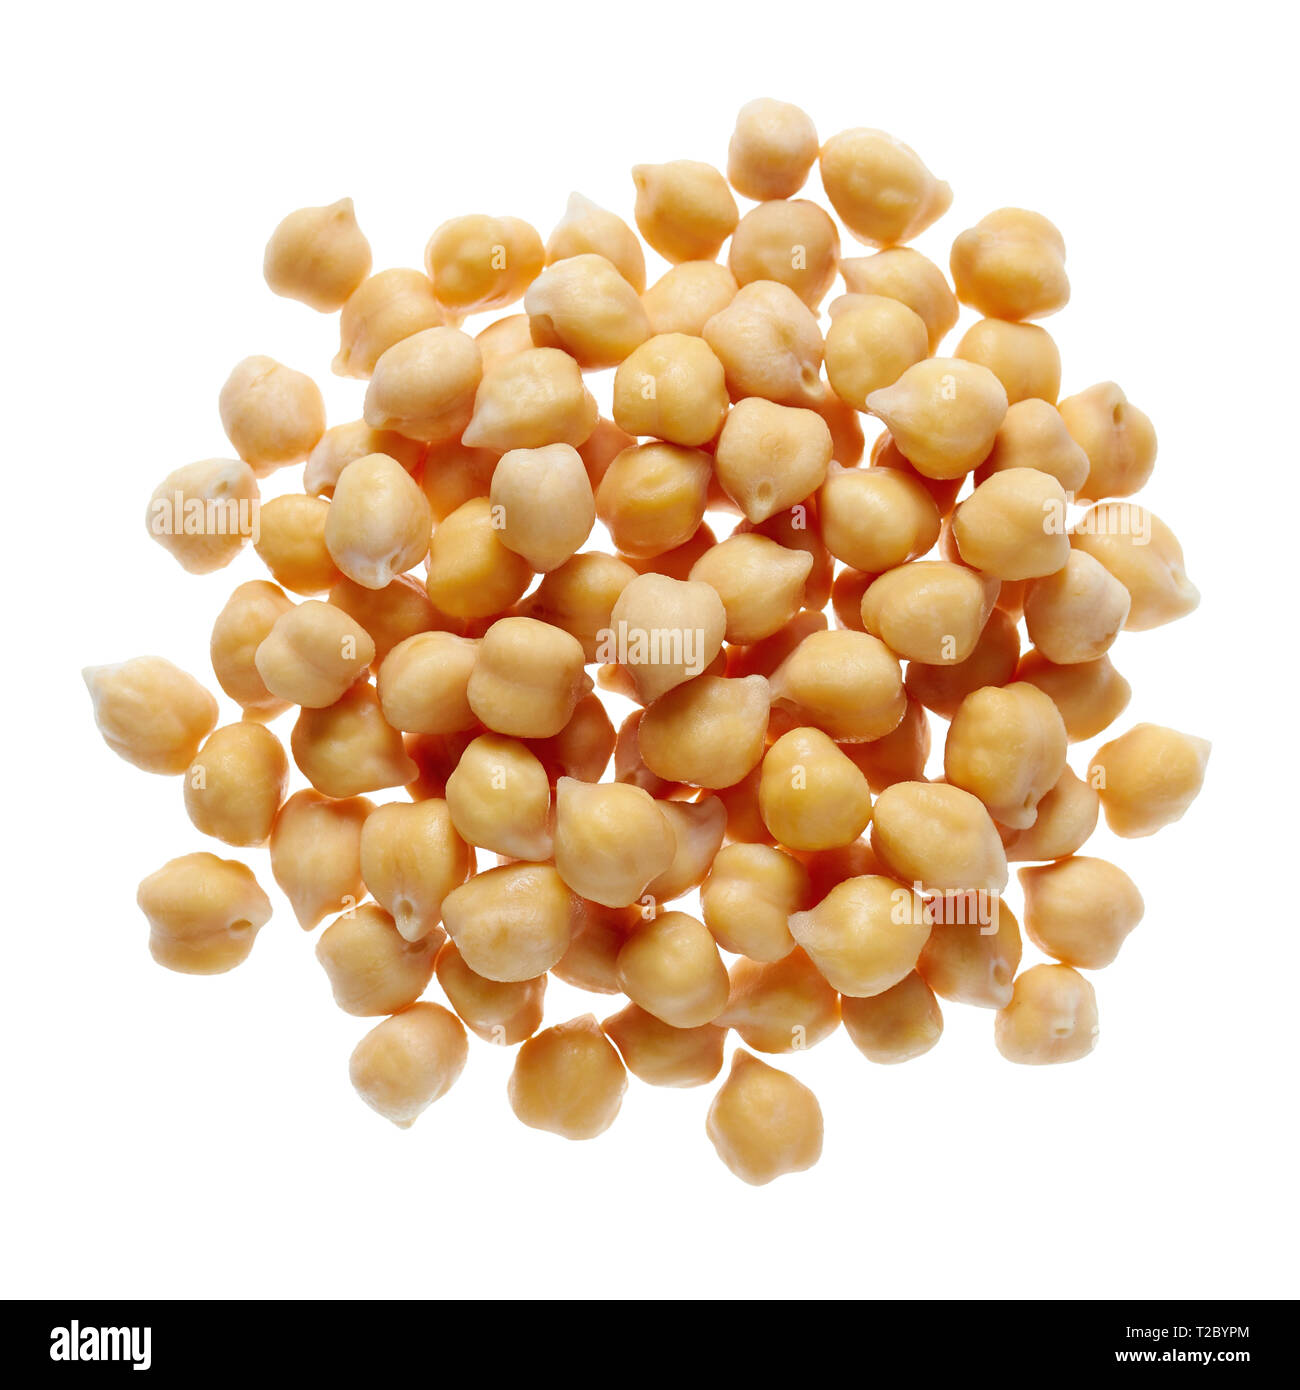 Close-Up of Chick Peas isolated on a white background. Stock Photo